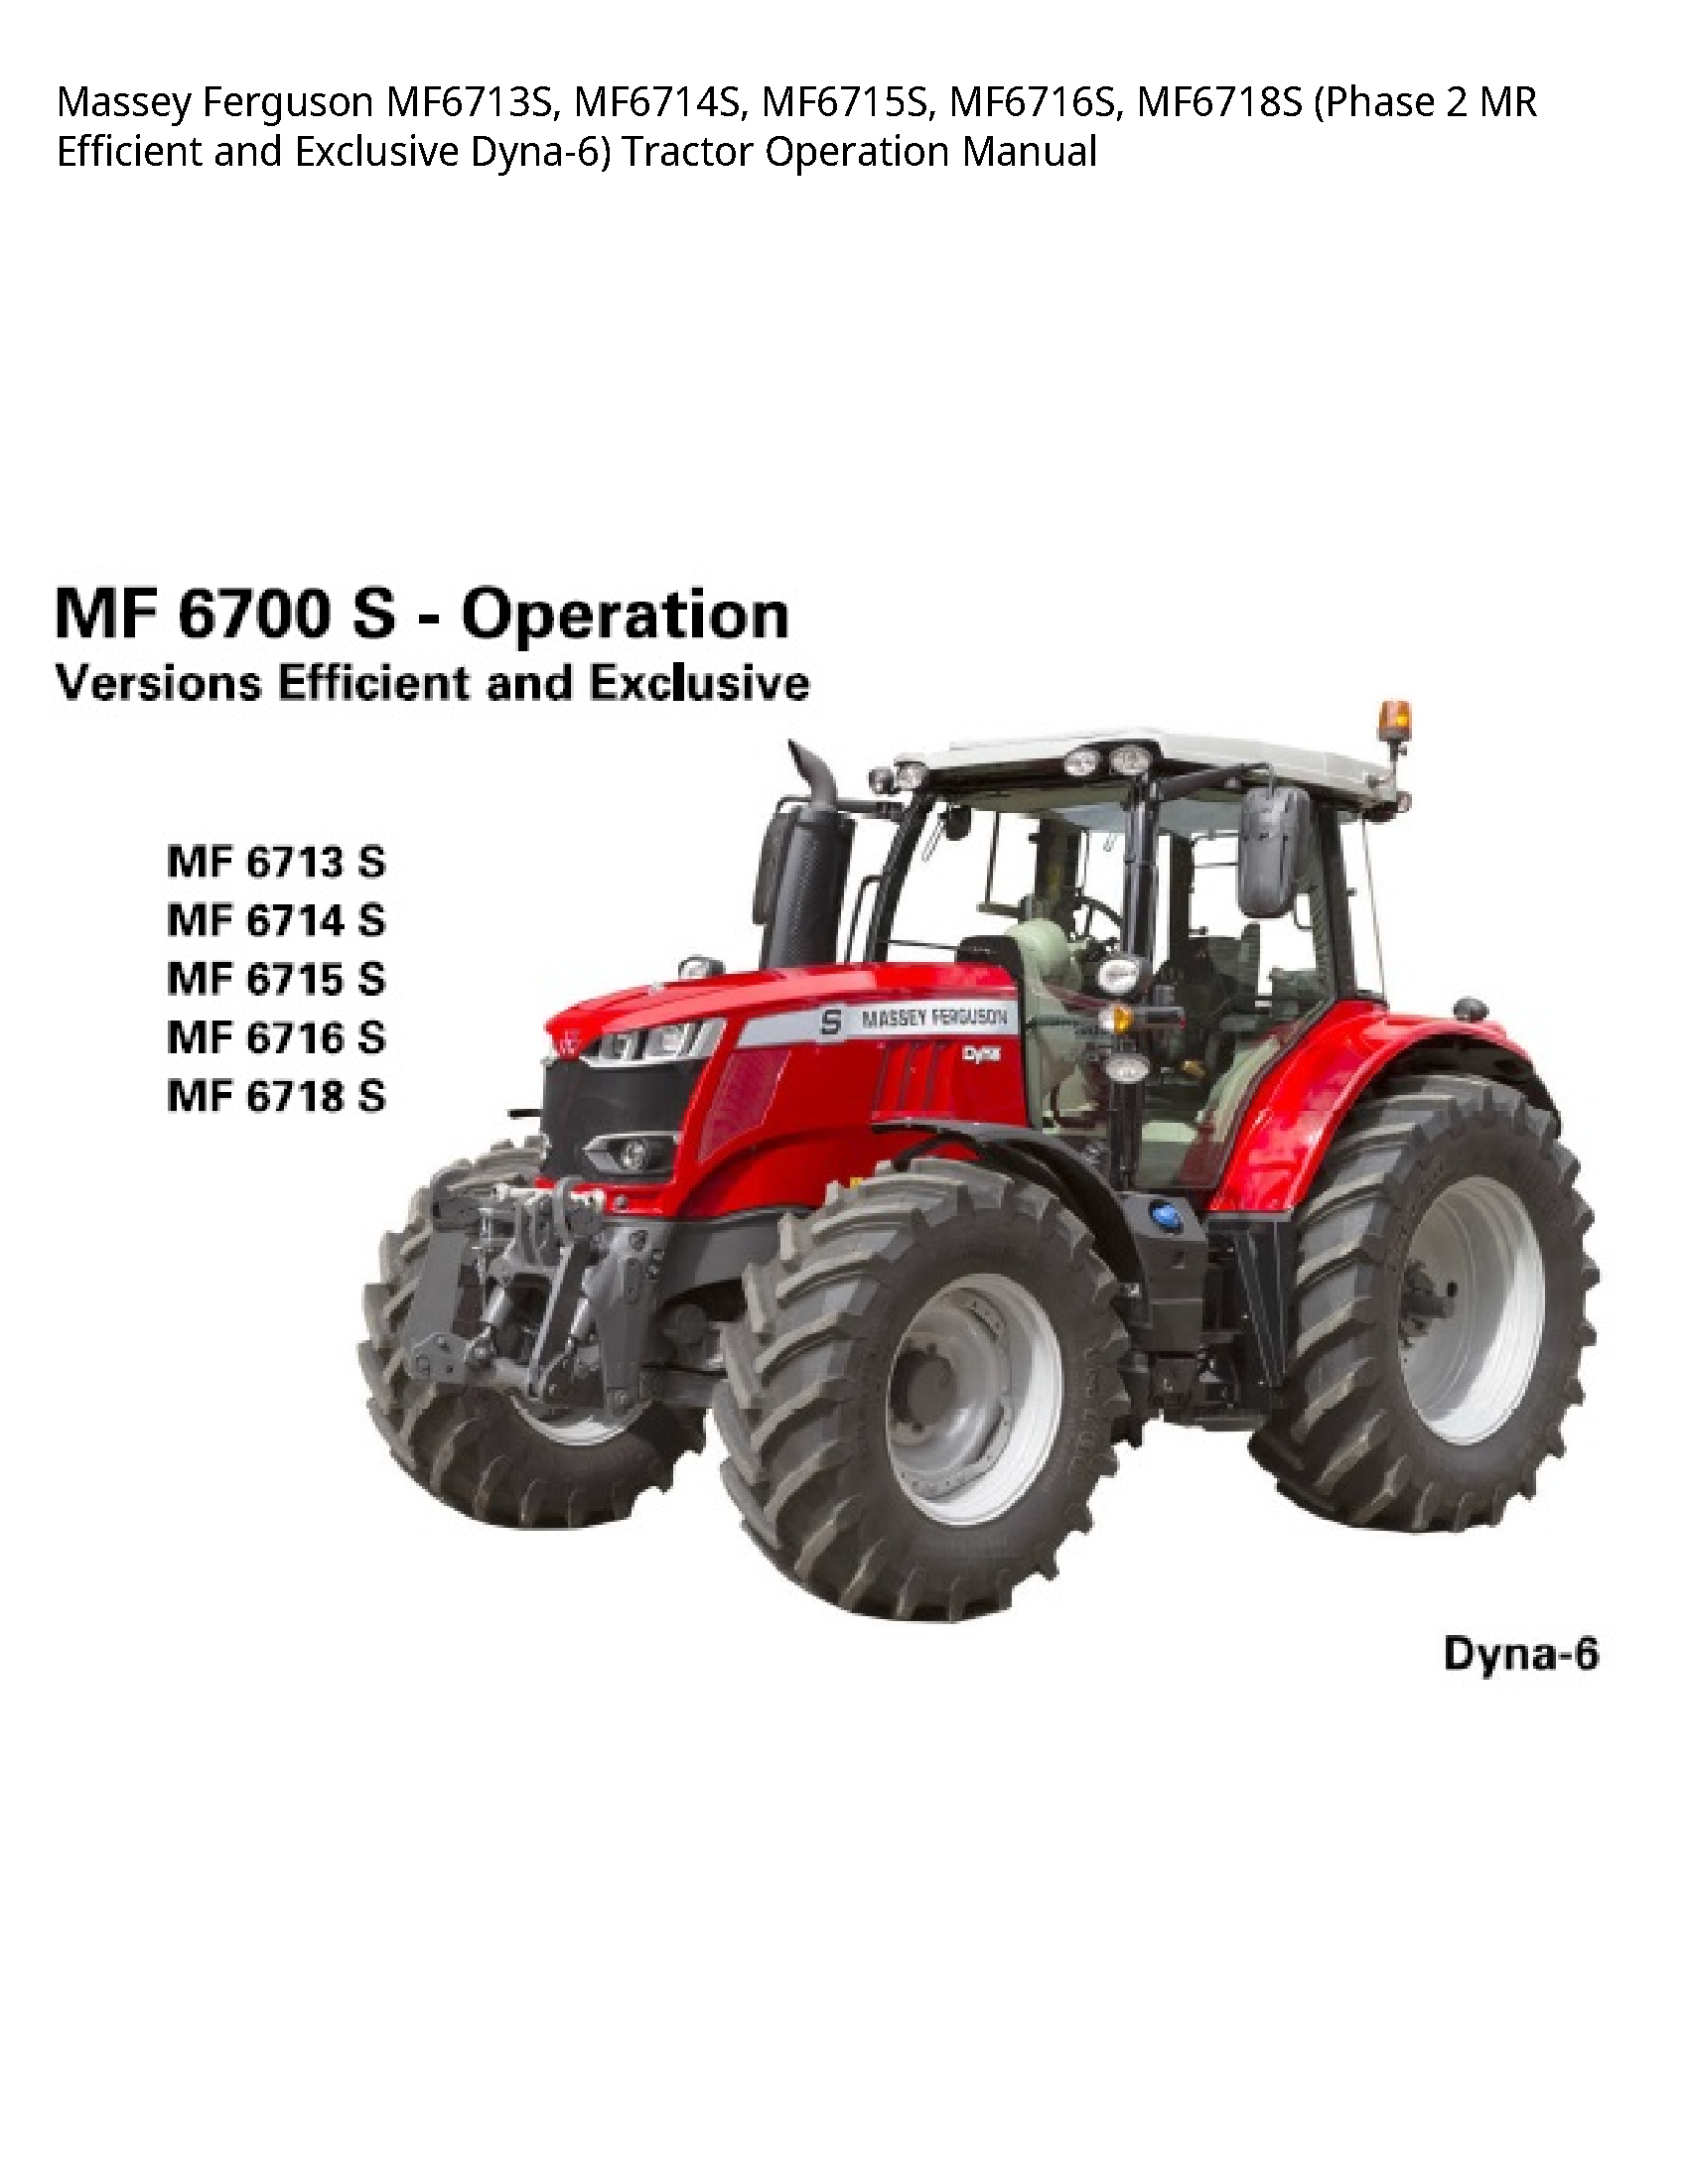 Massey Ferguson MF6713S (Phase MR Efficient  Exclusive Tractor Operation manual